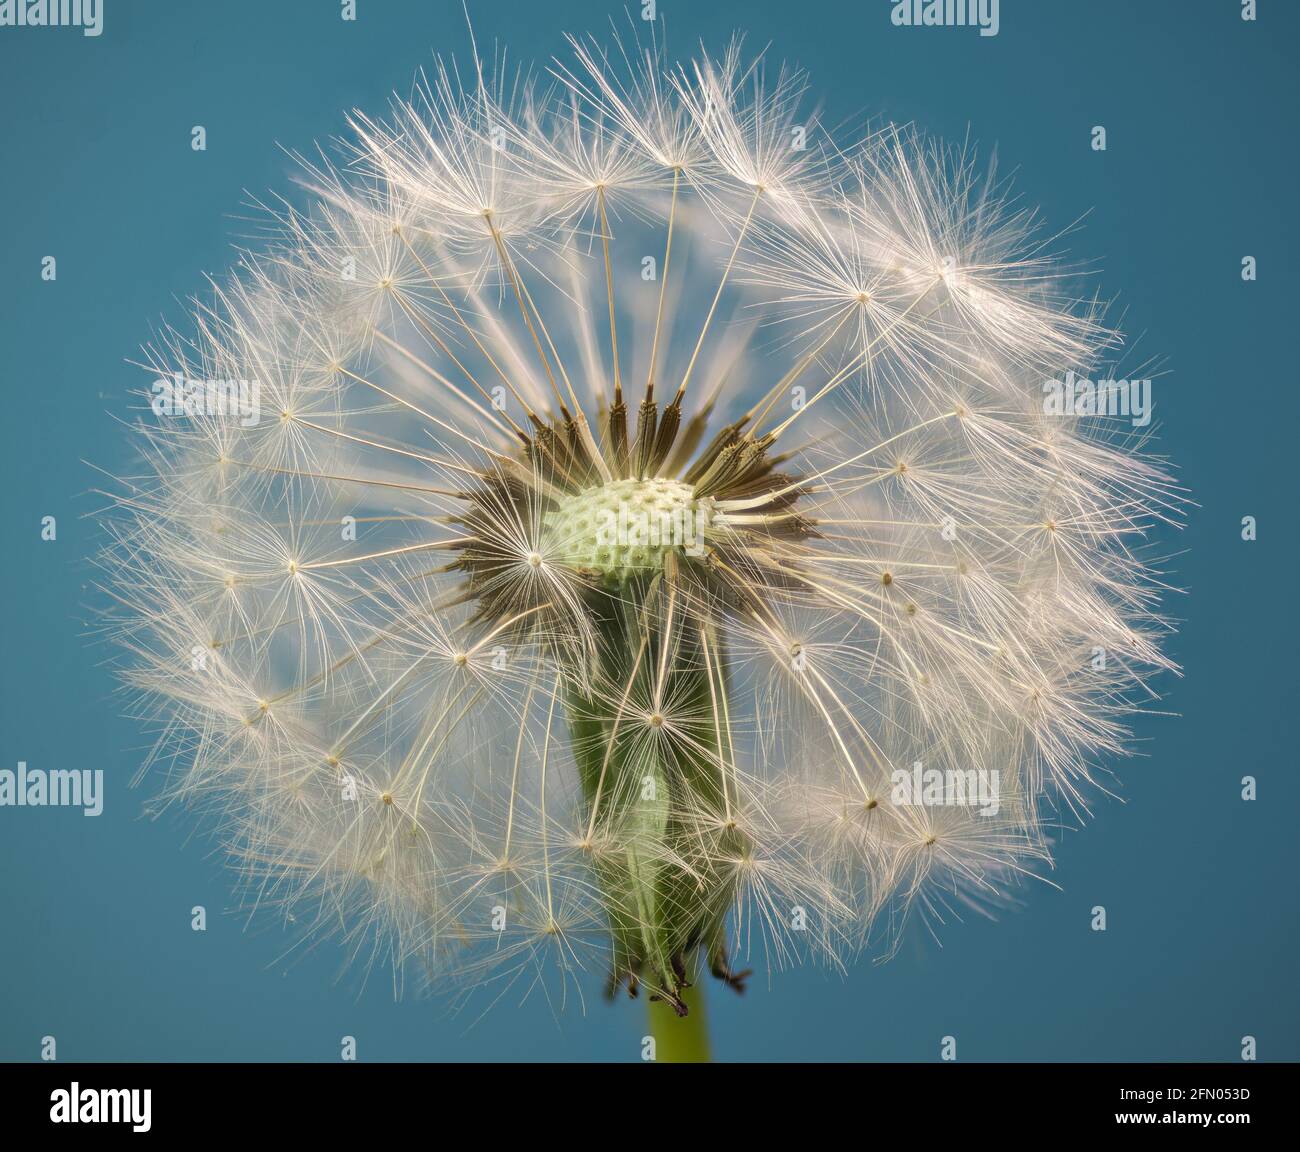 Macro view of seed head of dandelion (Taraxacum officinale), showing seeds with pappus disks, which carry seeds on the wind. Stock Photo